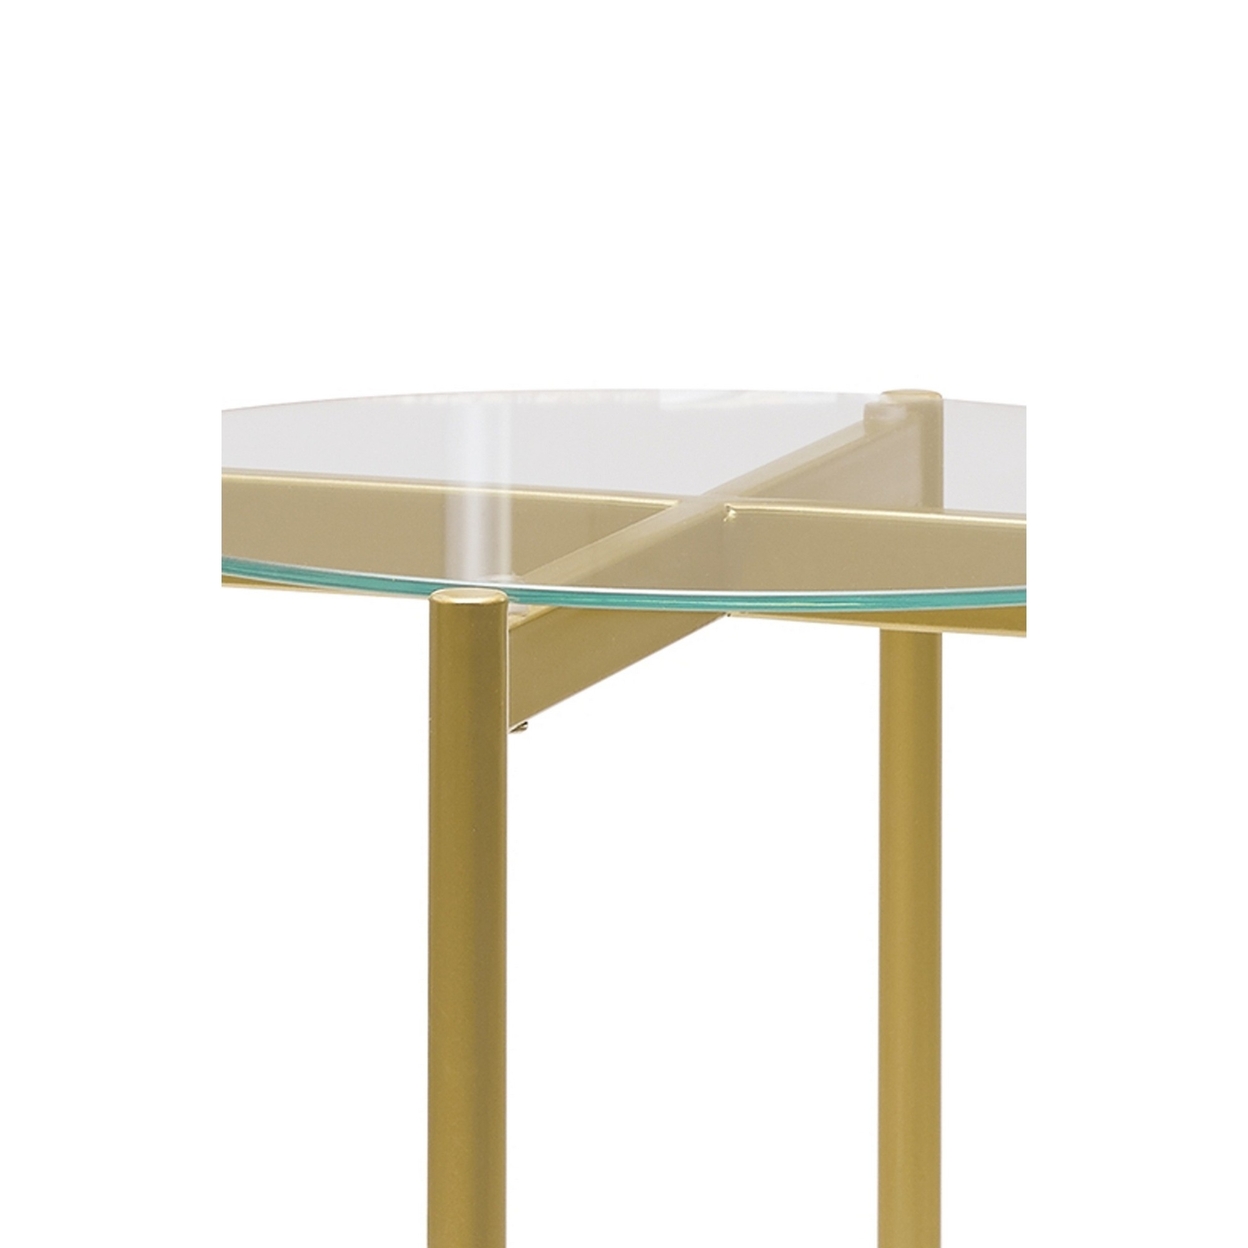 Glass Top Metal End Table With Marble Shelf, Gold And White- Saltoro Sherpi